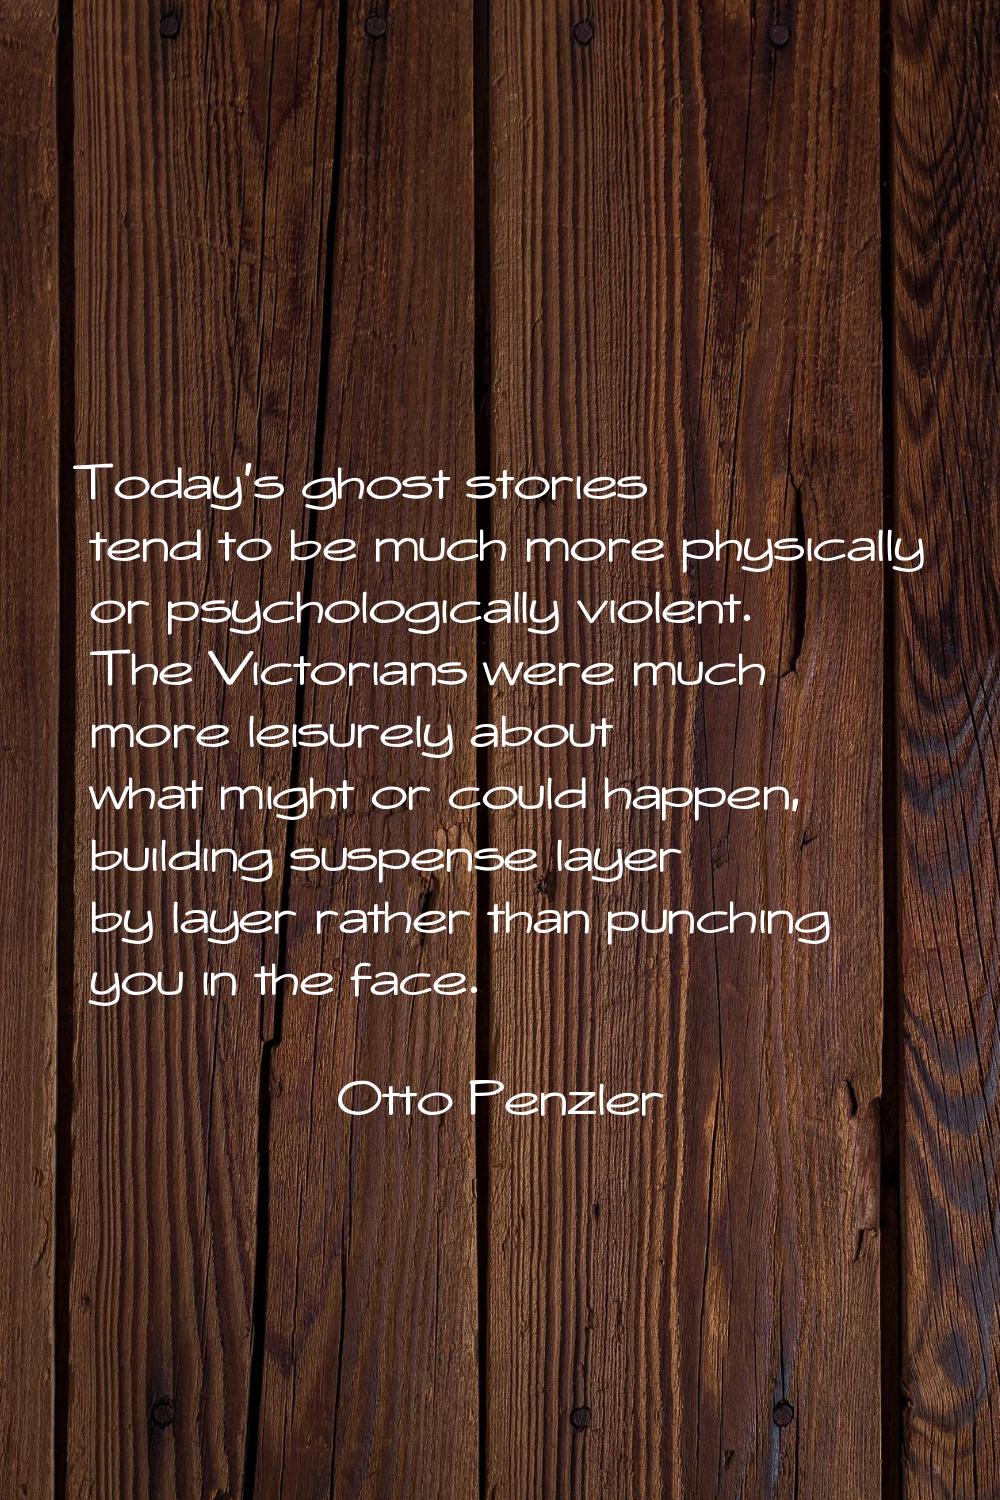 Today's ghost stories tend to be much more physically or psychologically violent. The Victorians we